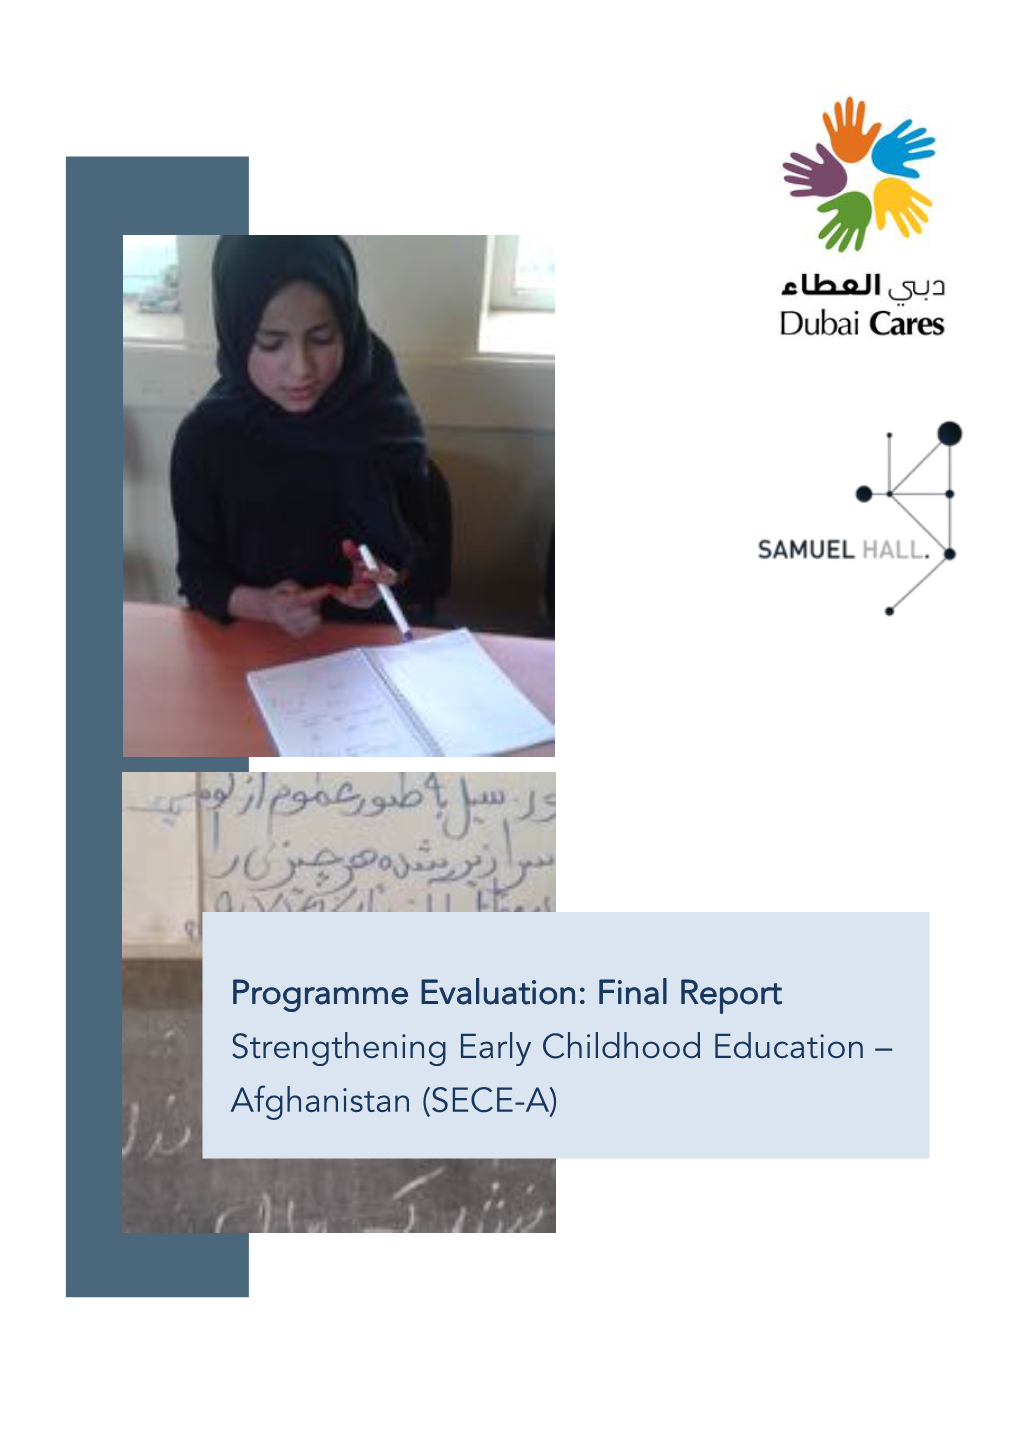 Final Report Strengthening Early Childhood Education – Afghanistan (SECE-A)